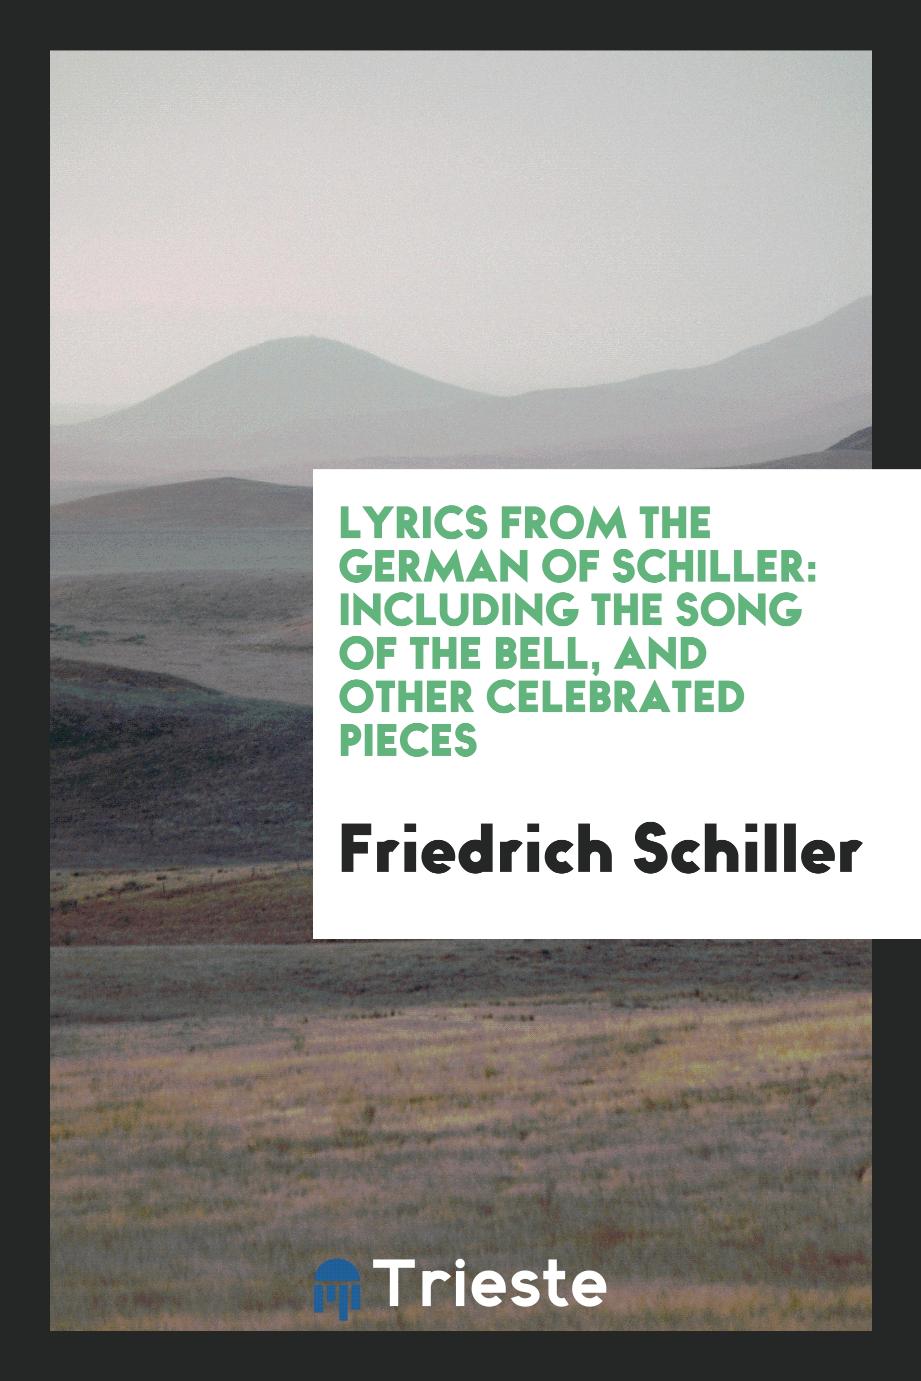 Lyrics from the German of Schiller: Including The Song of the Bell, and Other Celebrated Pieces